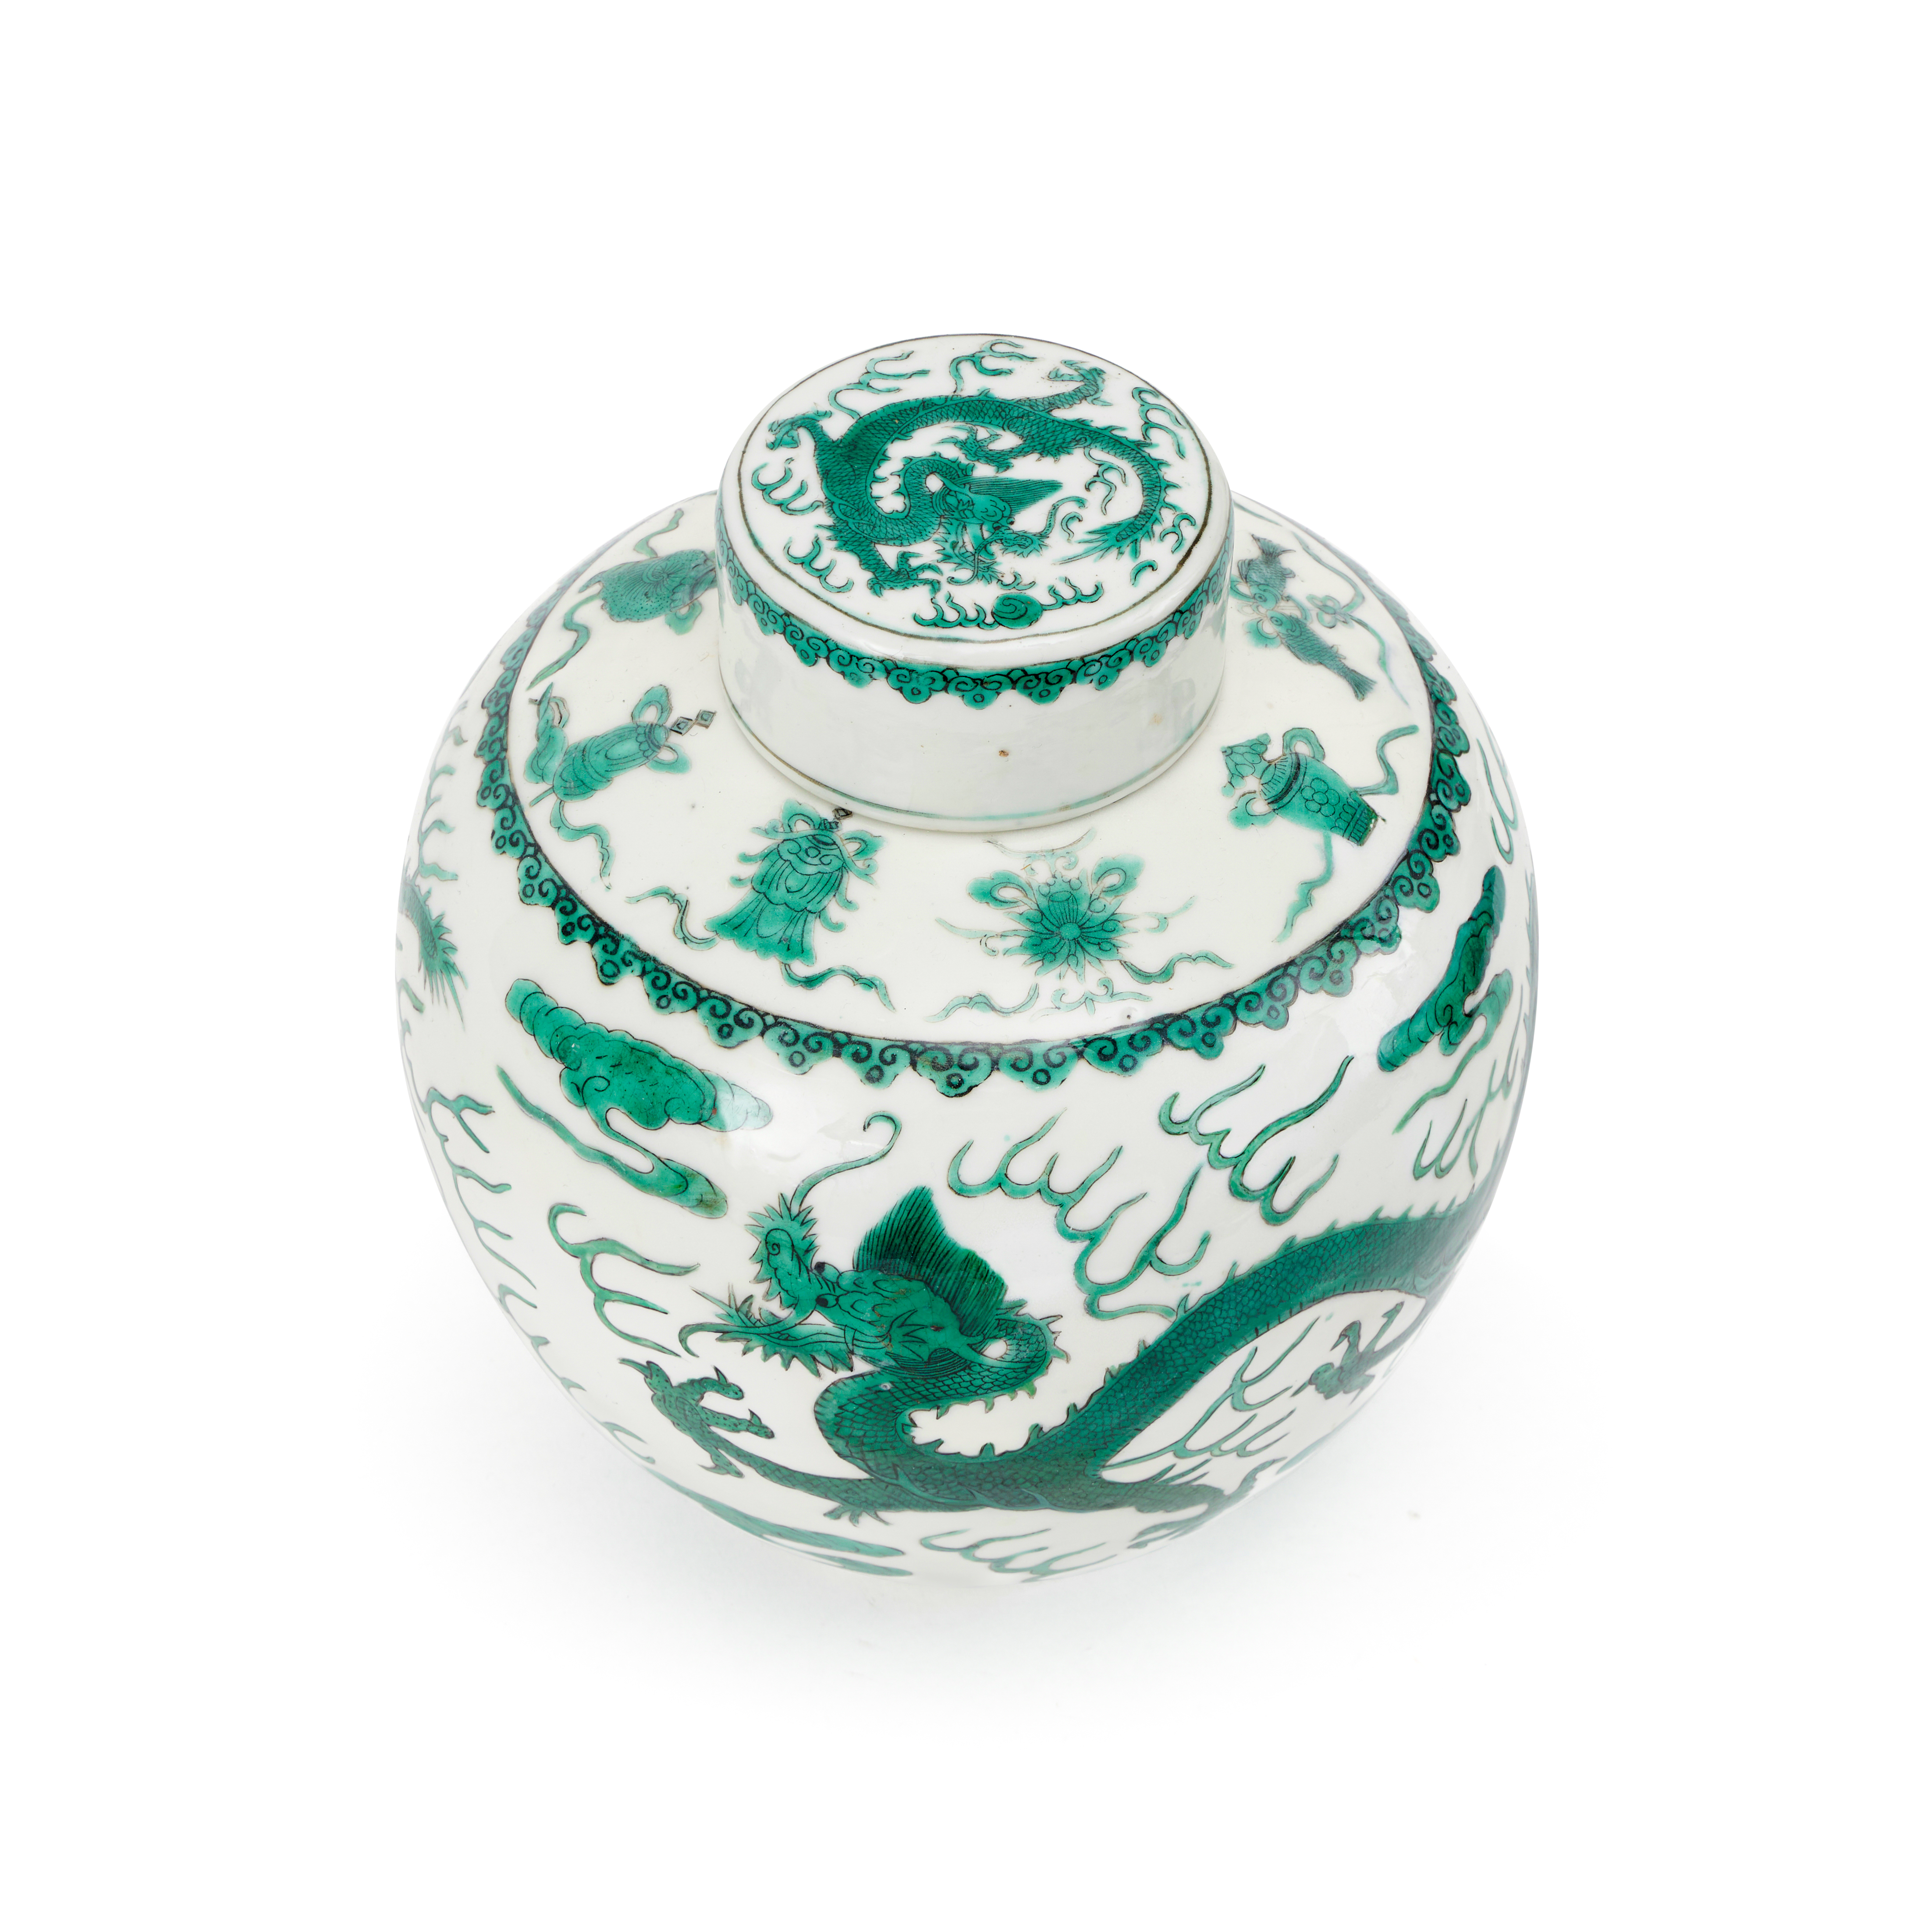 A FINE GREEN-ENAMELED 'DRAGON' JAR AND COVER, DAOGUANG MARK & OF THE PERIOD (1821-1850) - Image 2 of 5